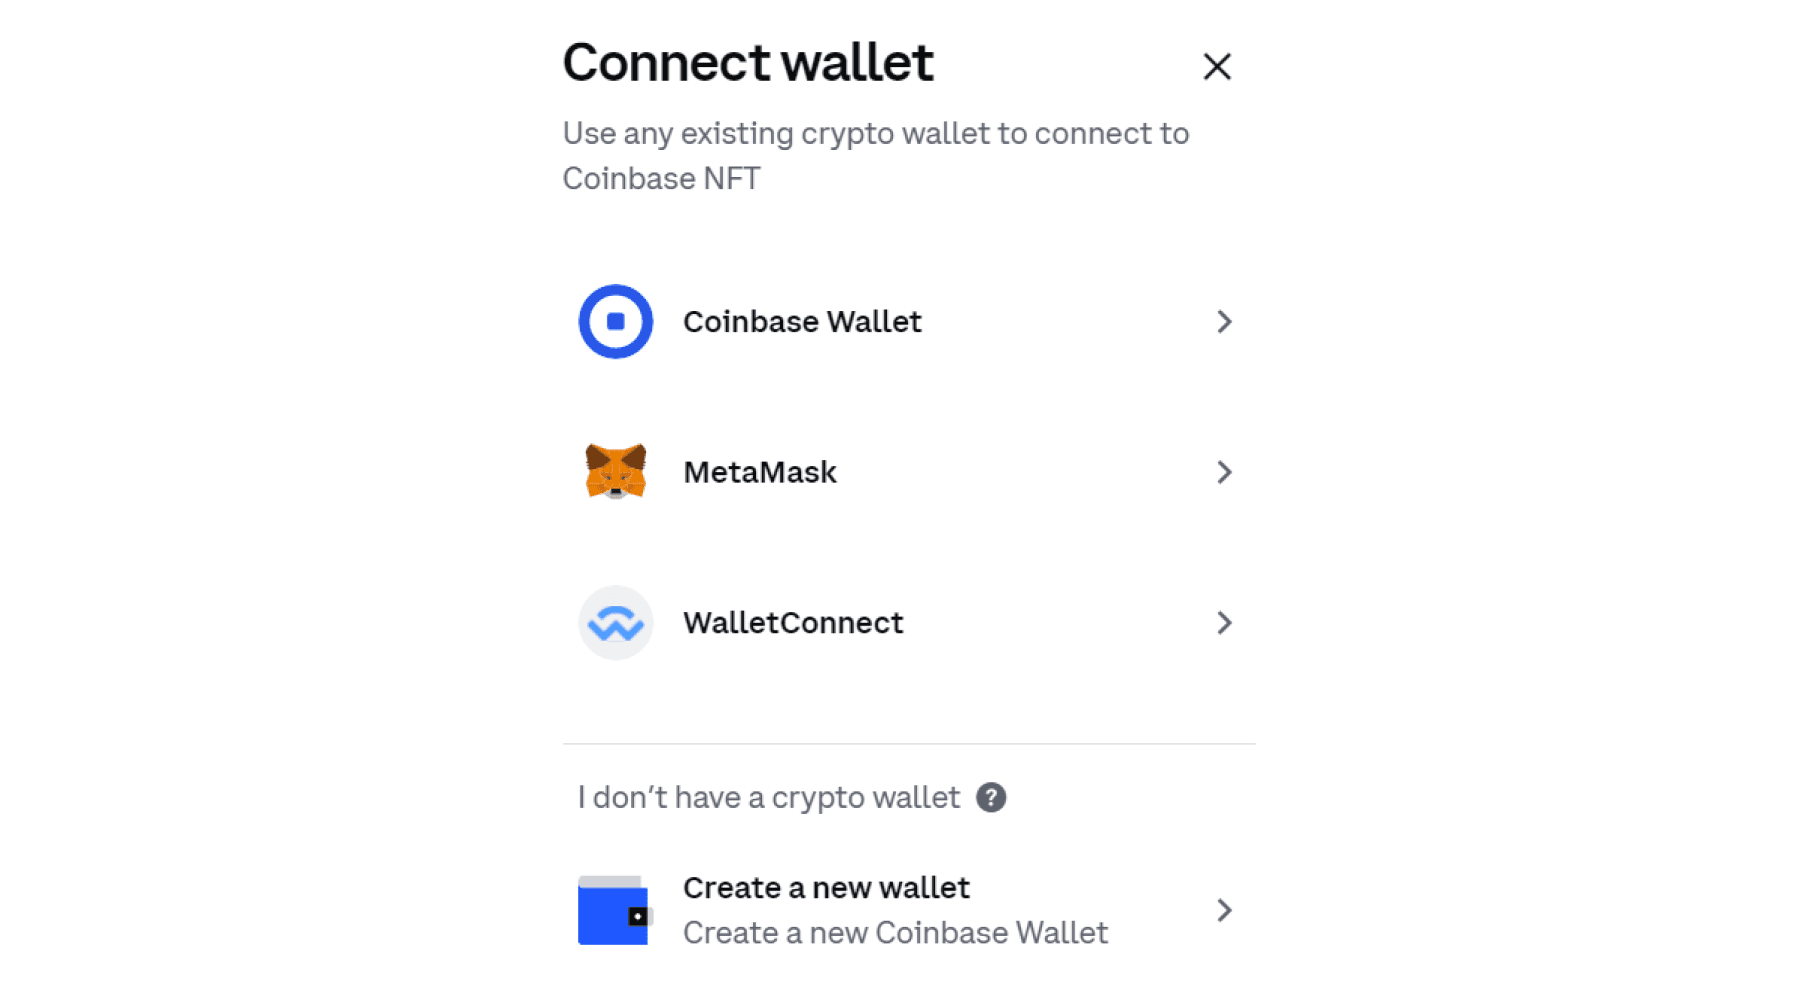 Coinbase NFT Connect Wallet